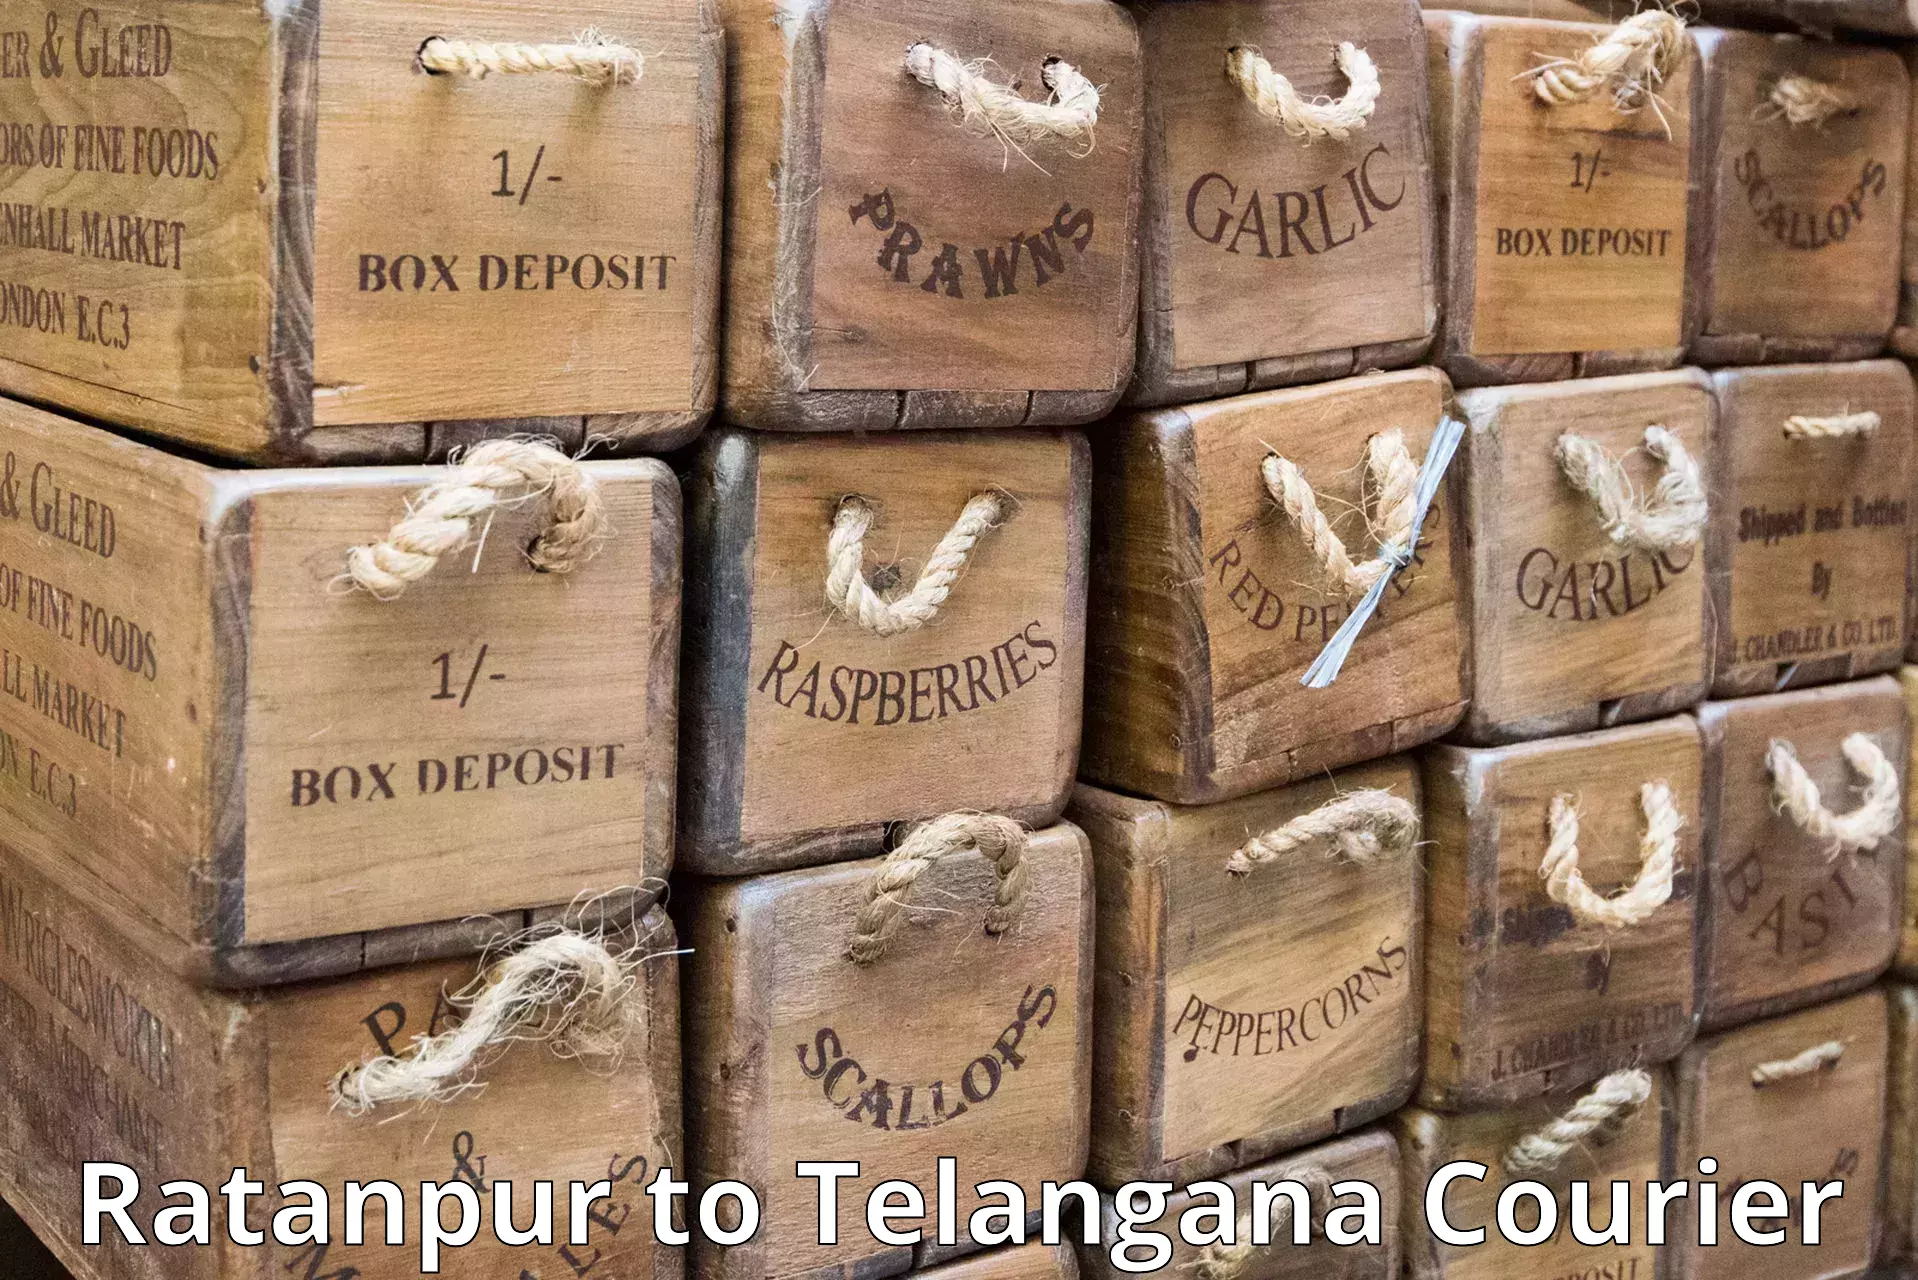 Air courier services Ratanpur to Yellareddipet